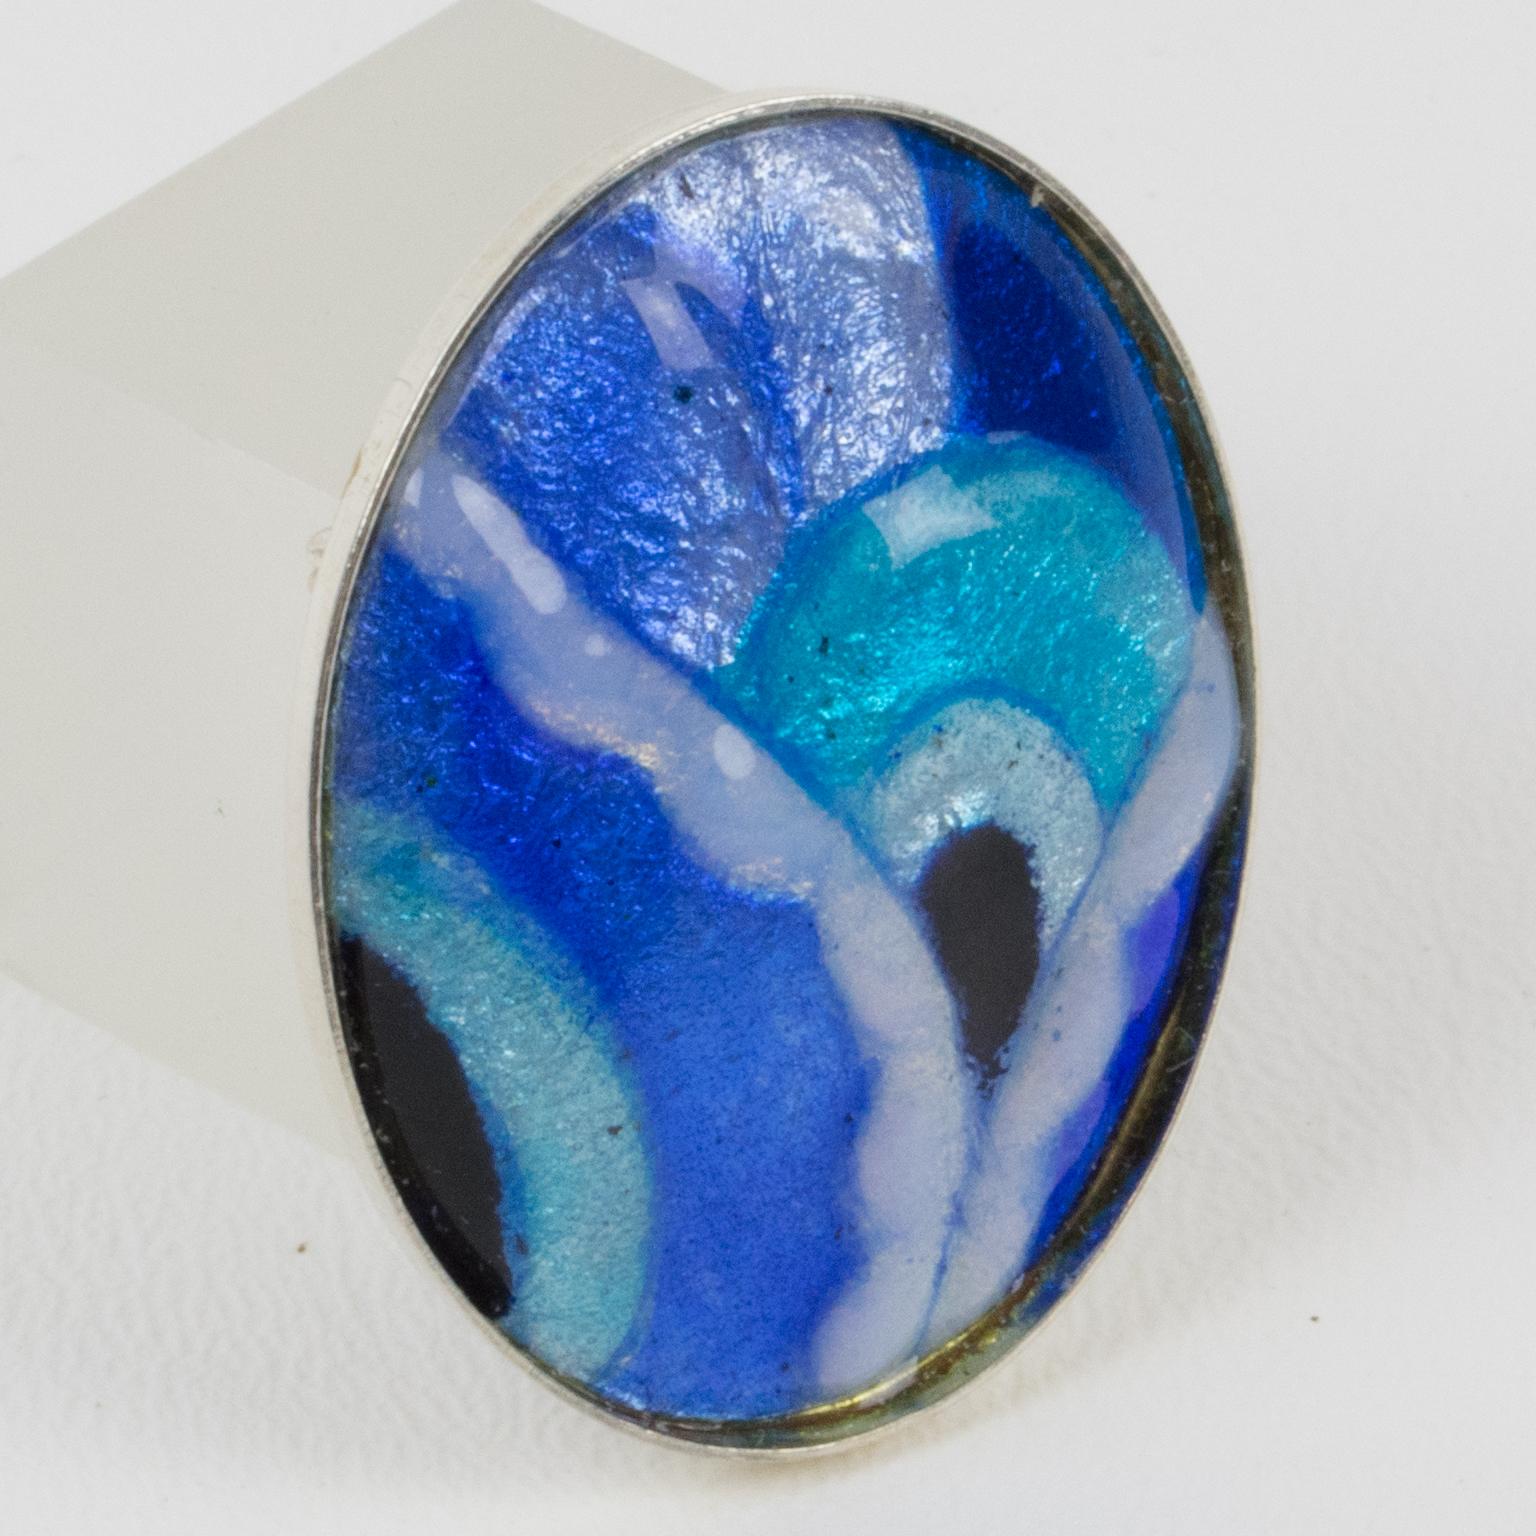 Romantic pin brooch by Limoges enamelist artist Mauricette Pinoteau. Ovoid sterling silver frame with an enamel-on-copper cameo. Art-Deco inspired design with a geometric shape. Assorted colors of cobalt blue and turquoise blue, navy blue, white and